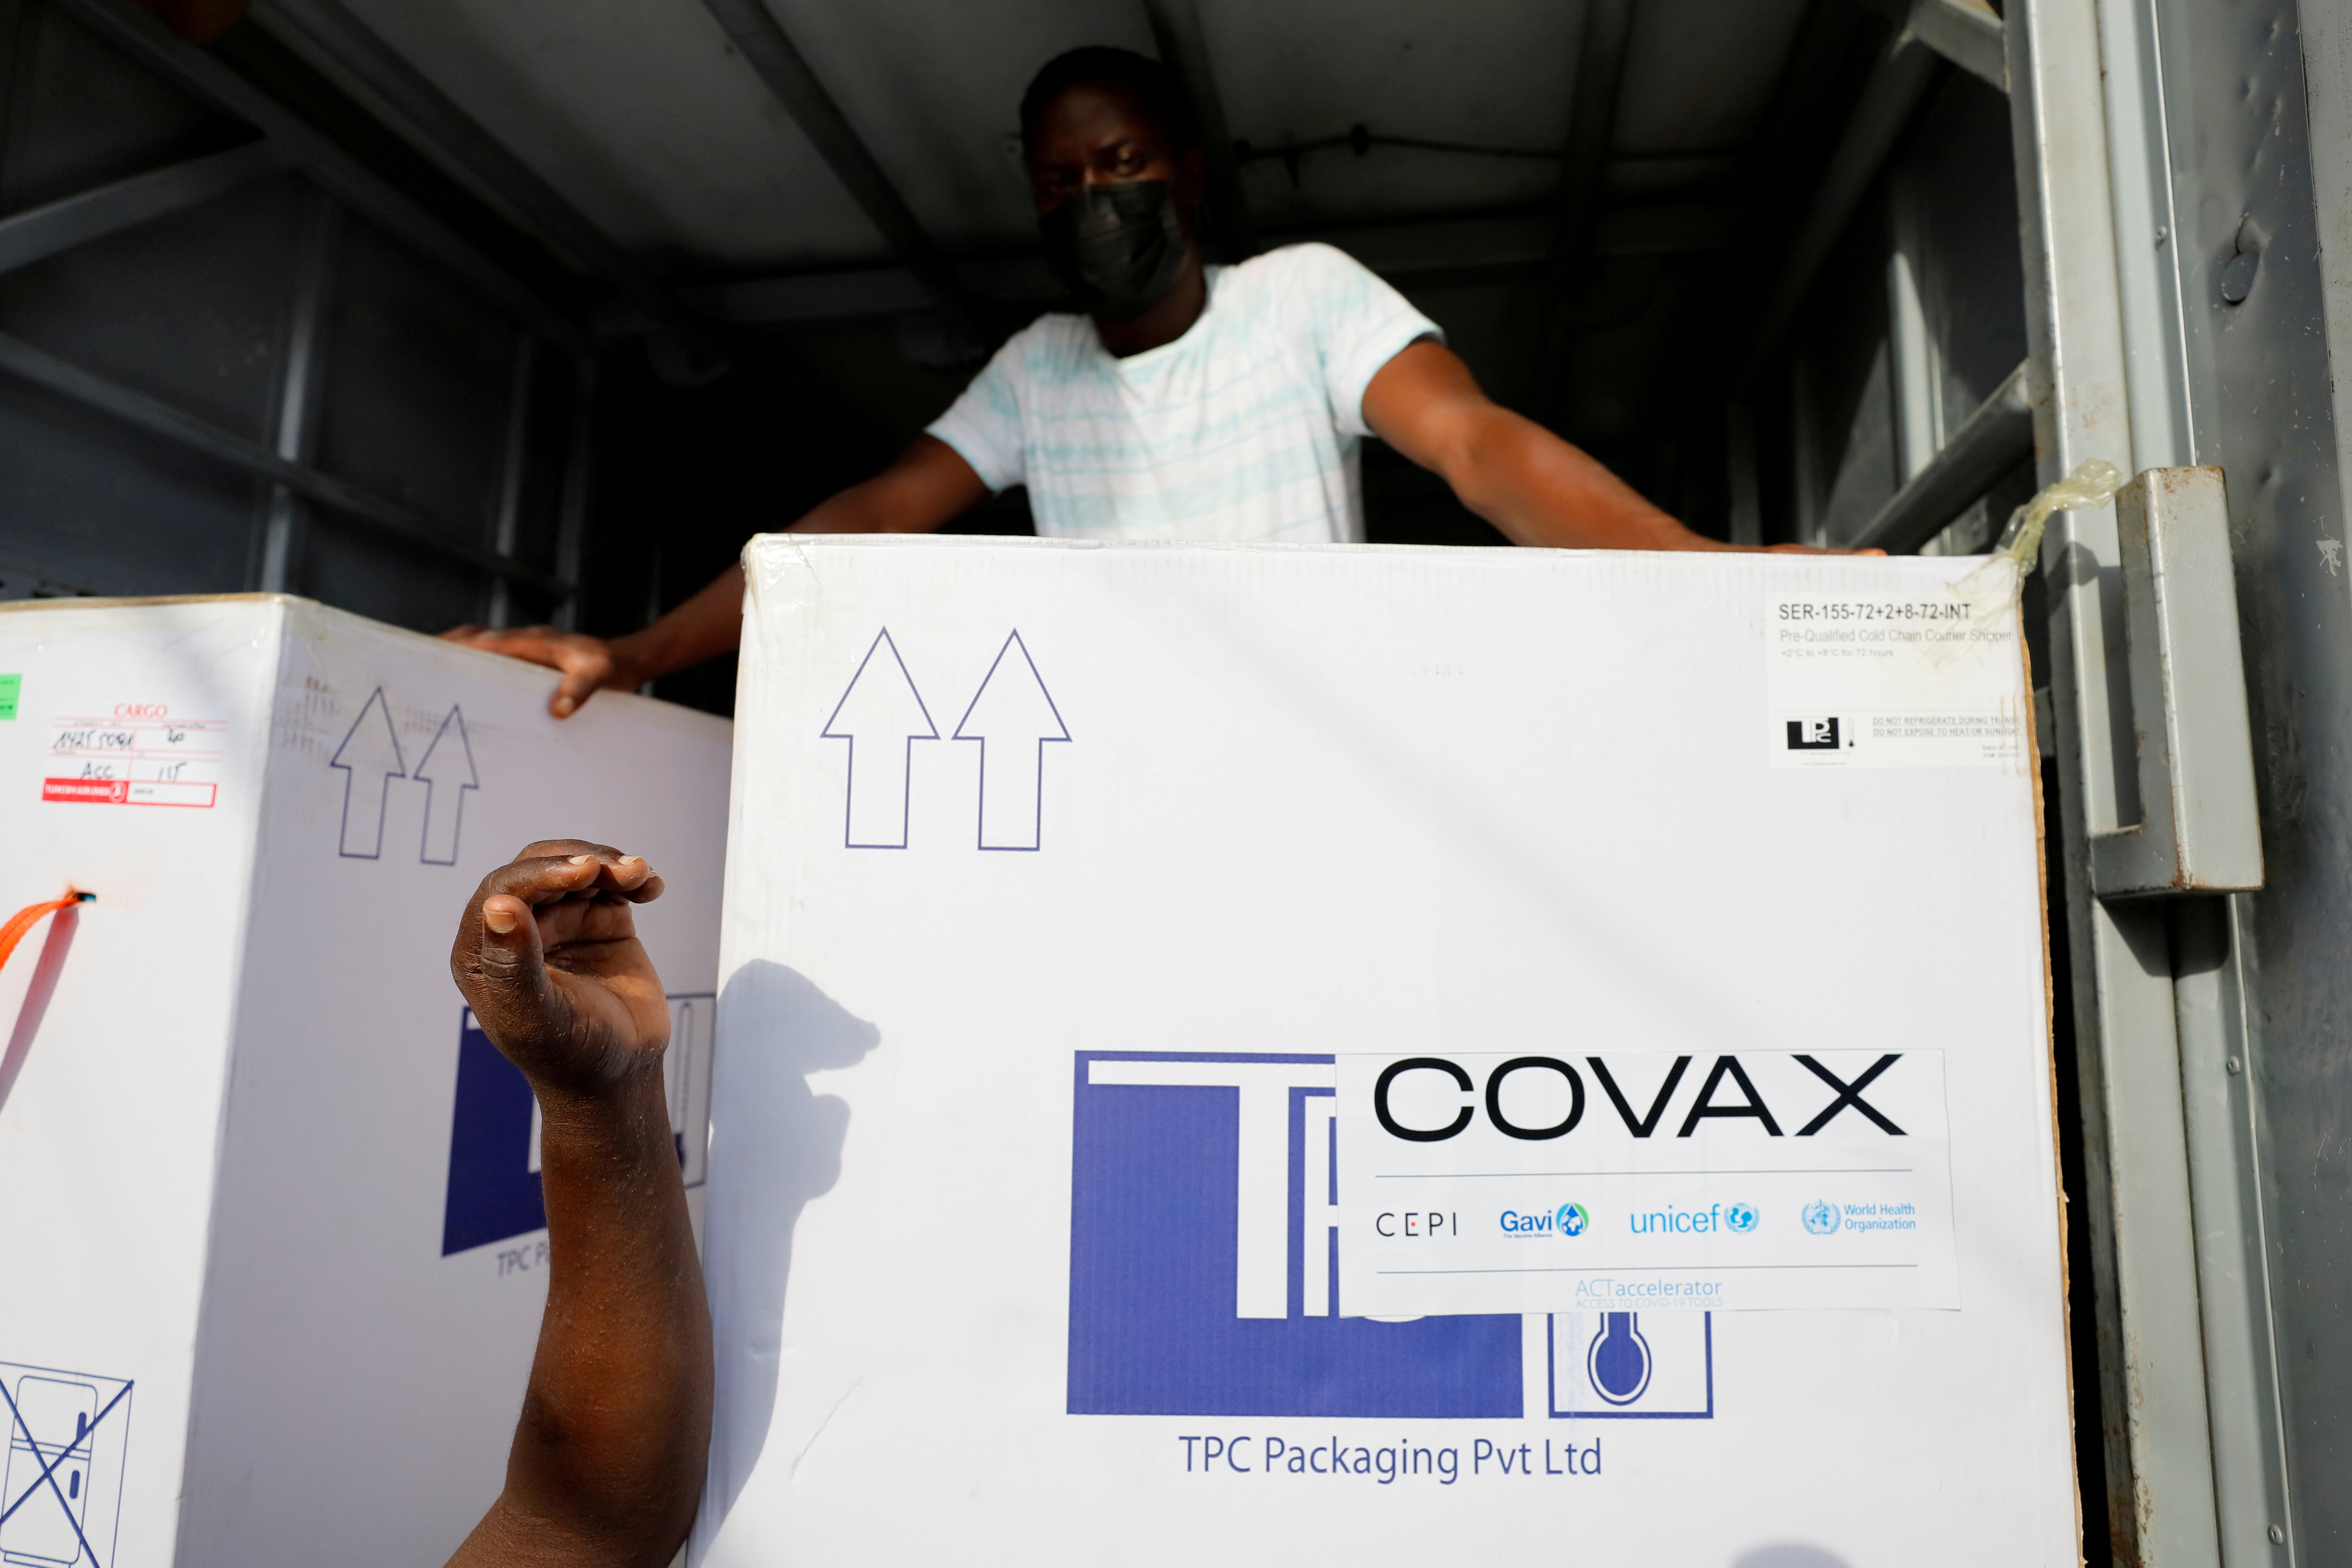 Boxes of AstraZeneca/Oxford coronavirus vaccines, redeployed from the Democratic Republic of Congo, arrive at a cold storage facility in Accra, Ghana, May 7, 2021. REUTERS/Francis Kokoroko/File Photo